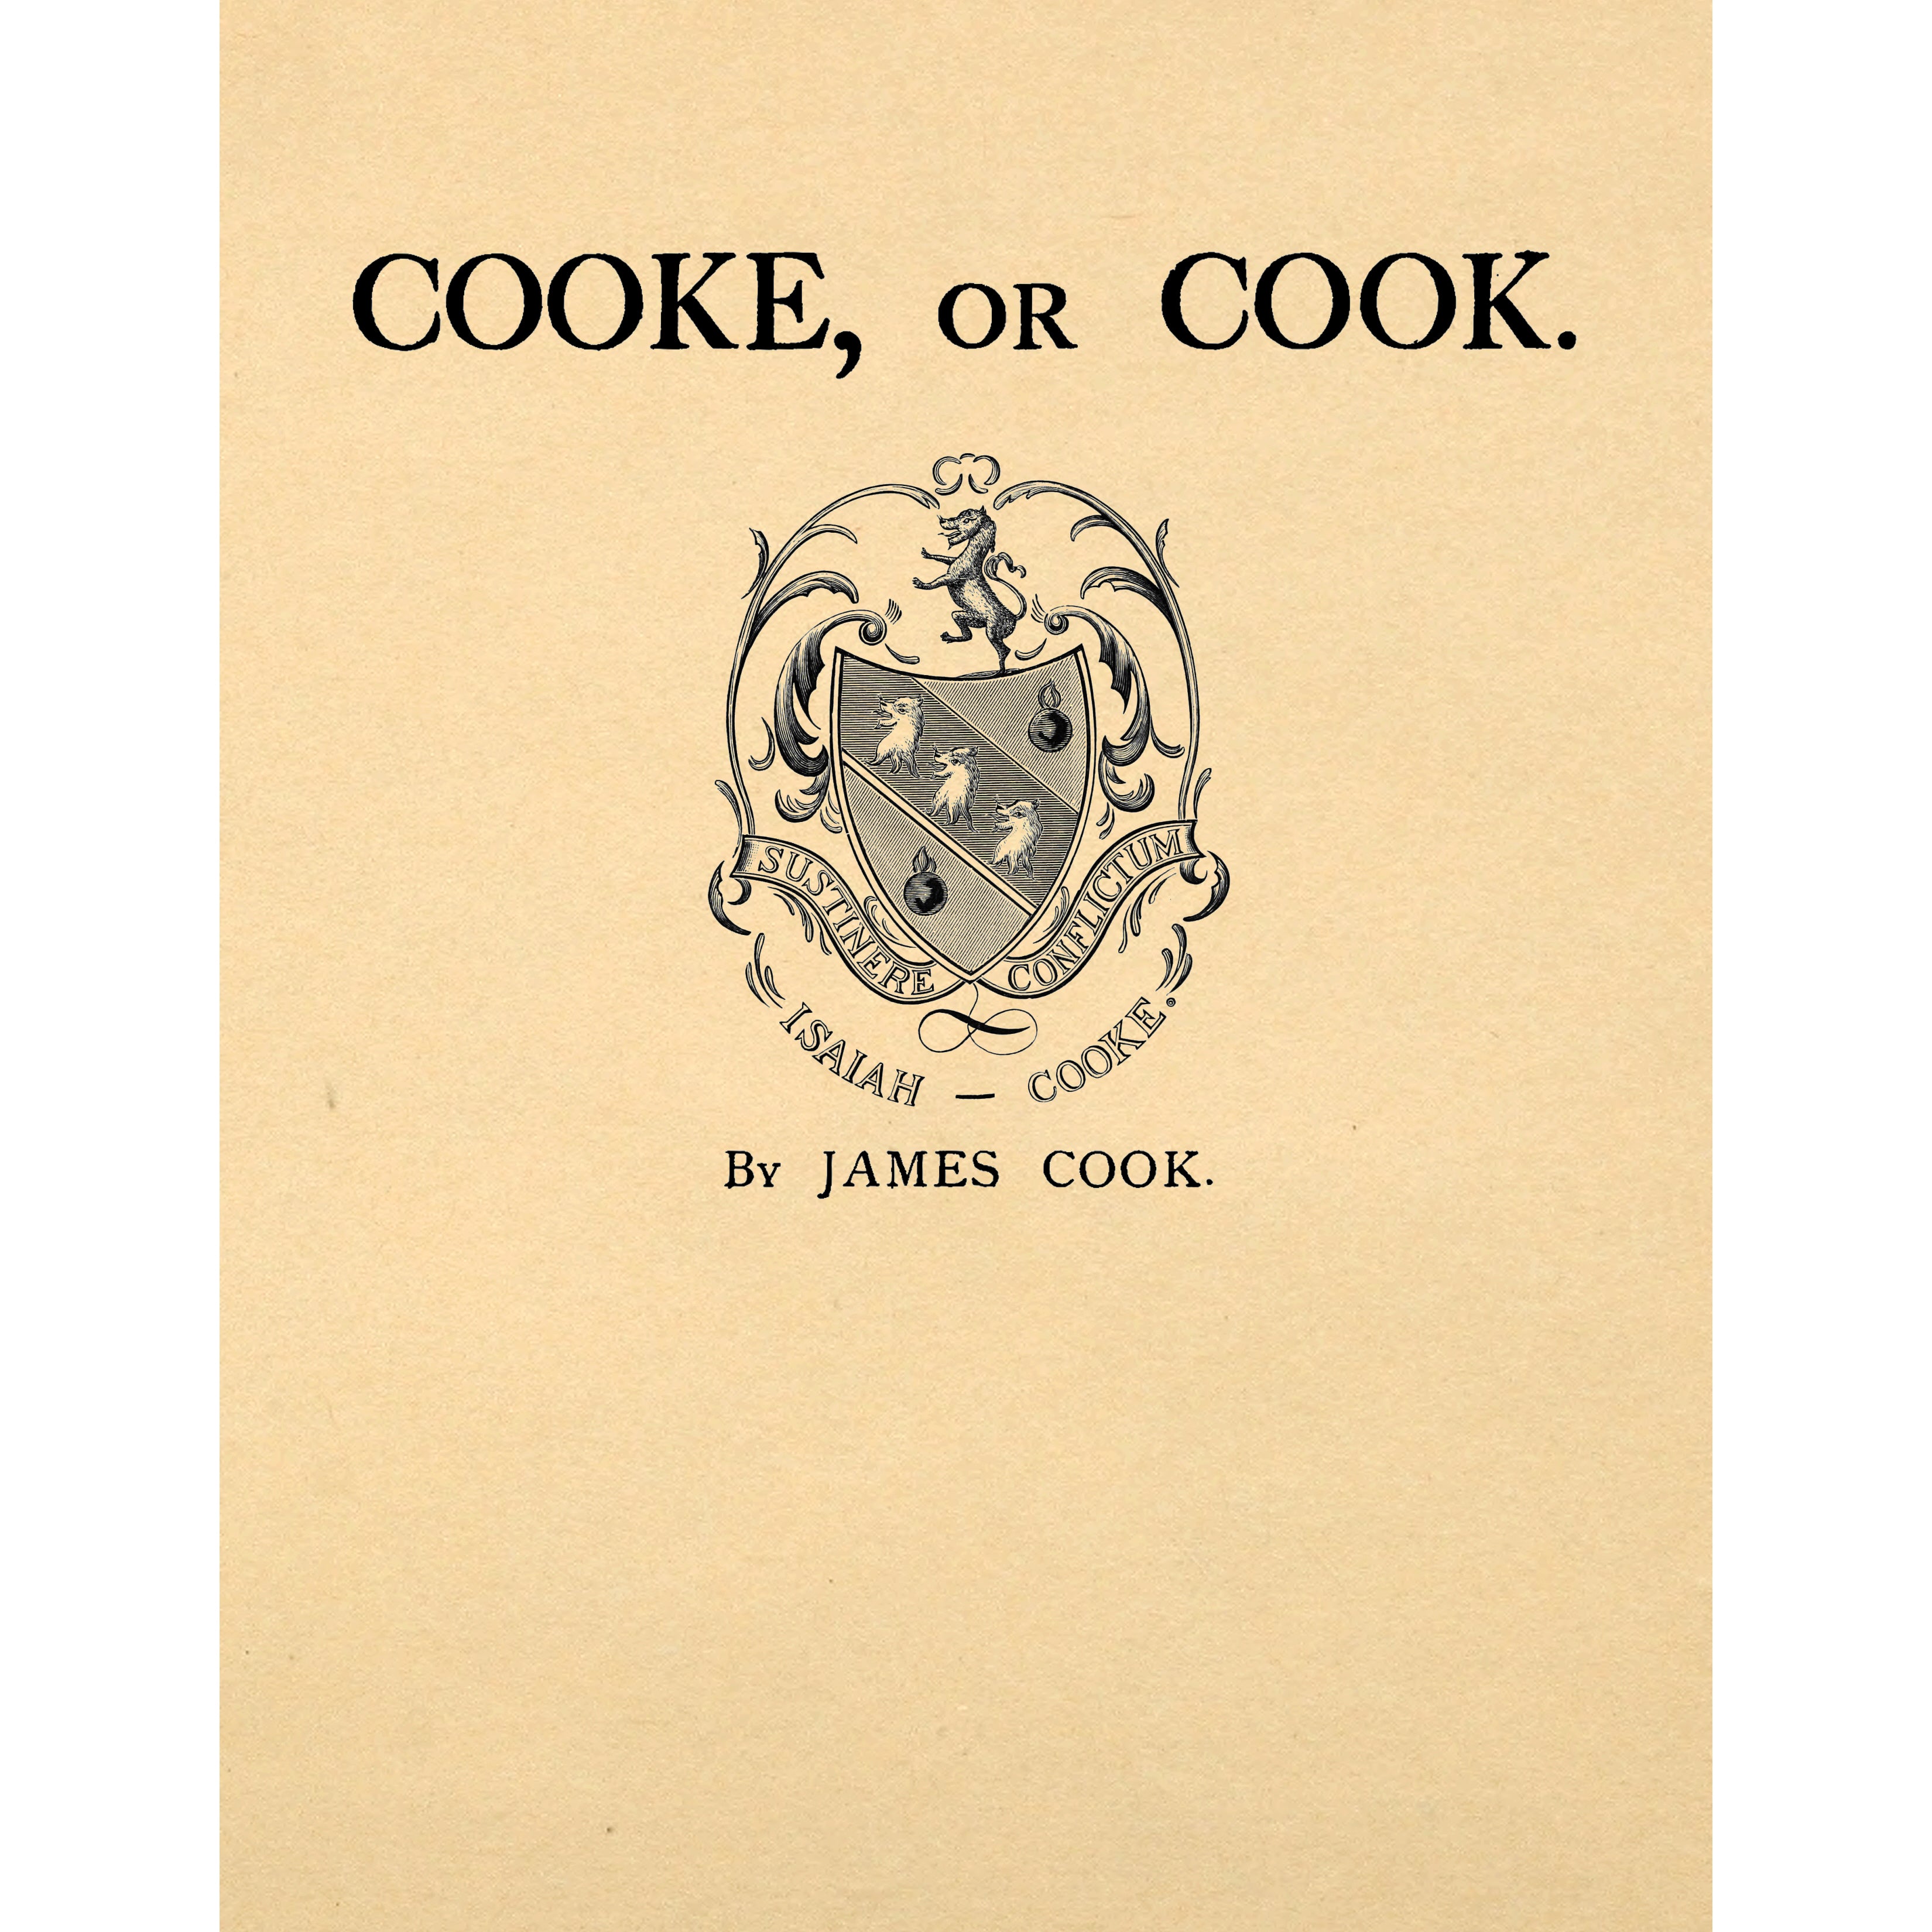 A genealogy of families bearing the name Cooke, or Cook : principally in Massachusetts and Connecticut, 1665-1882.